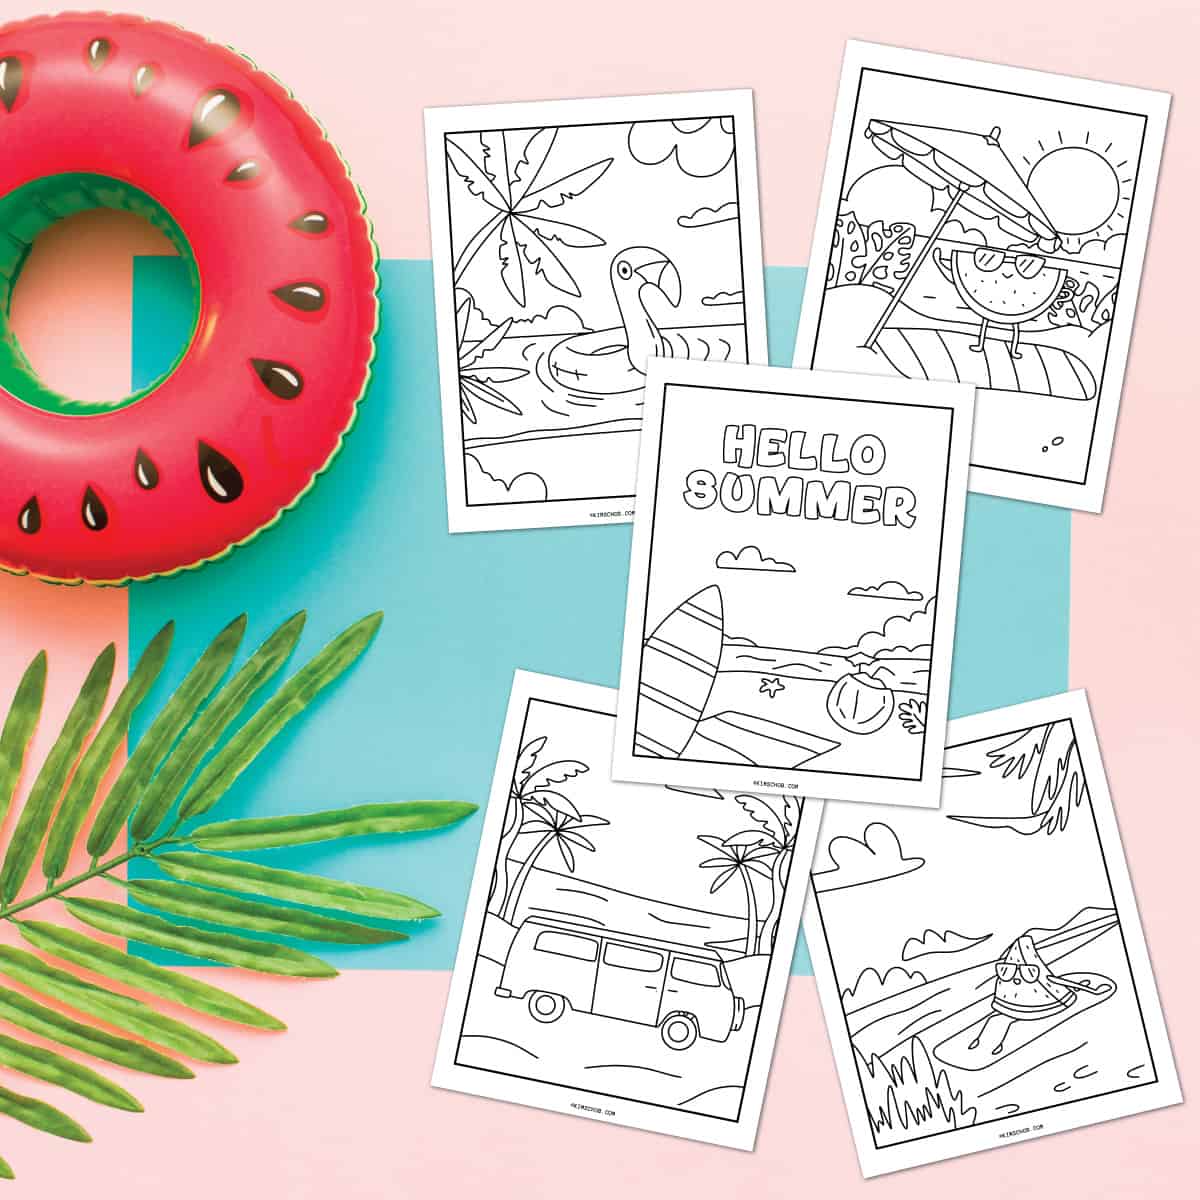 Pool party printables and coloring sheets